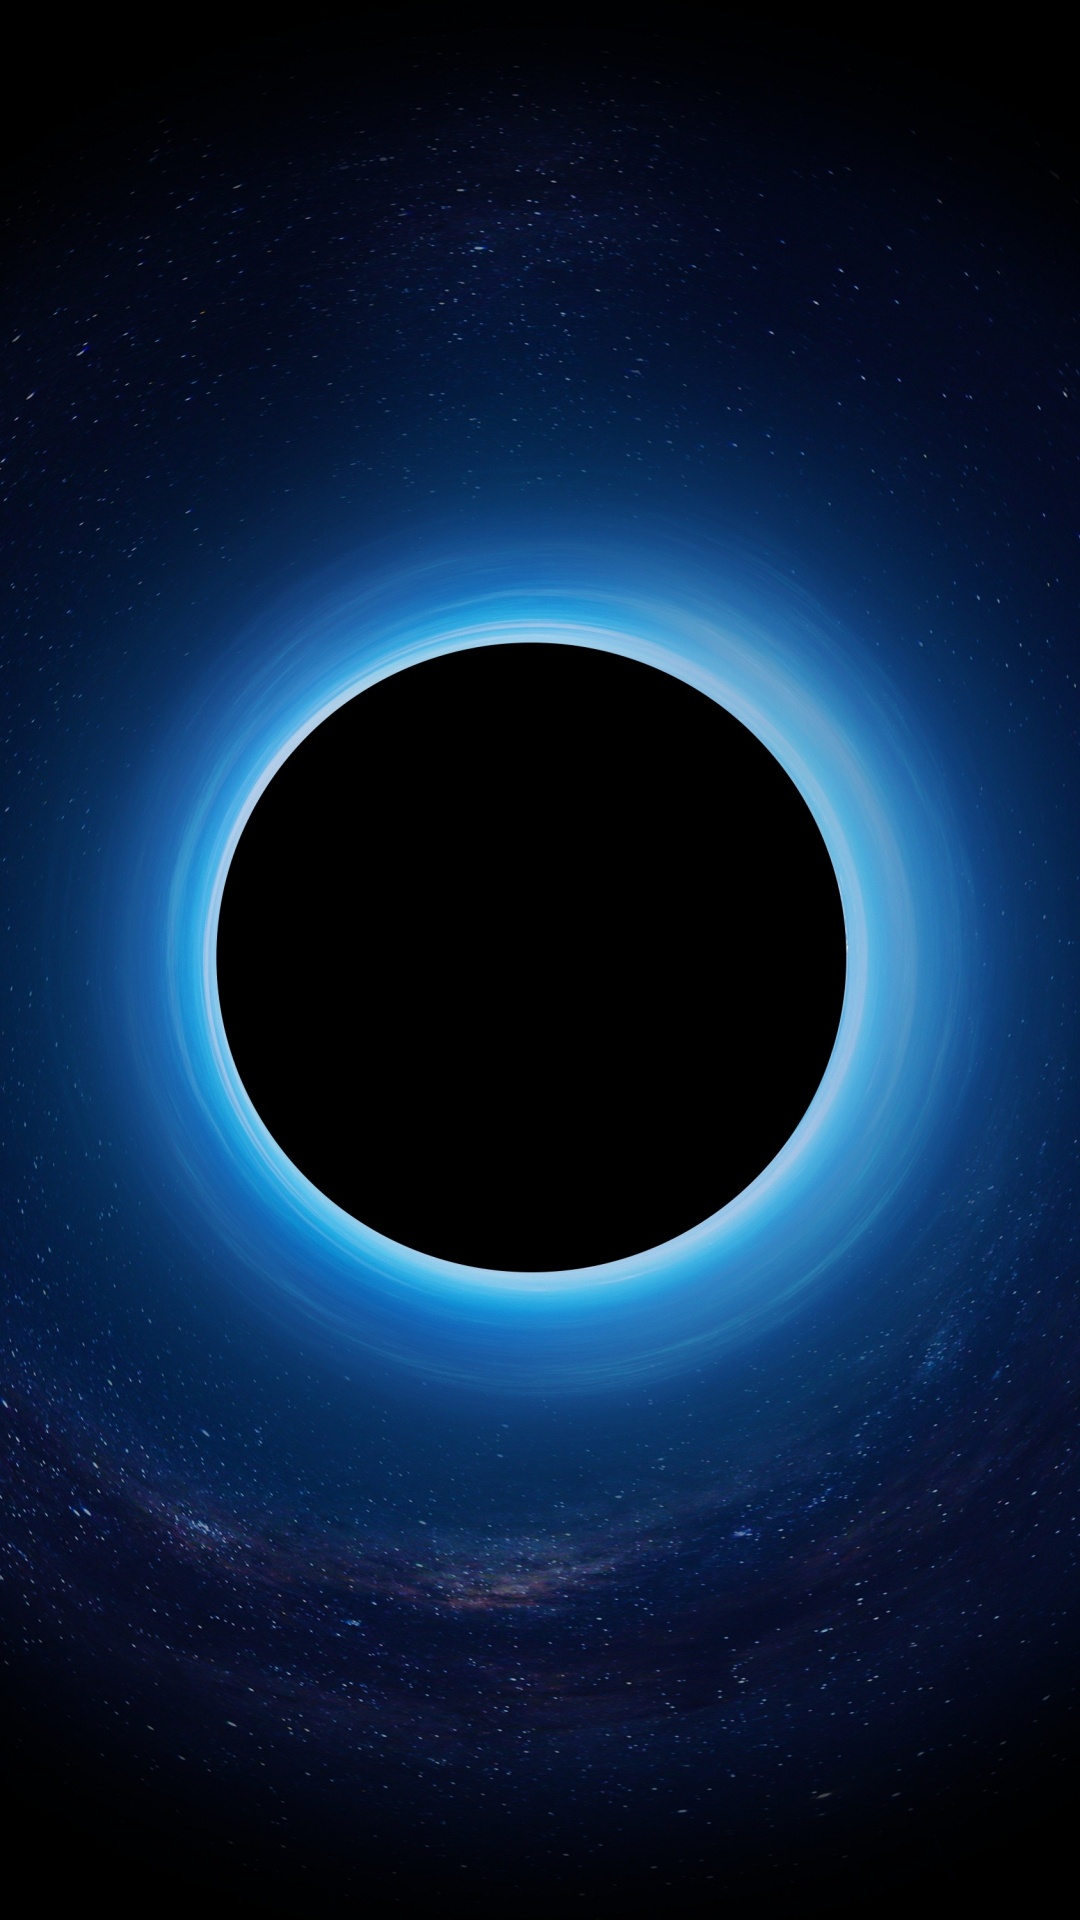 Black Hole Wallpaper for IPhone 6S /7 /8 [Retina HD]